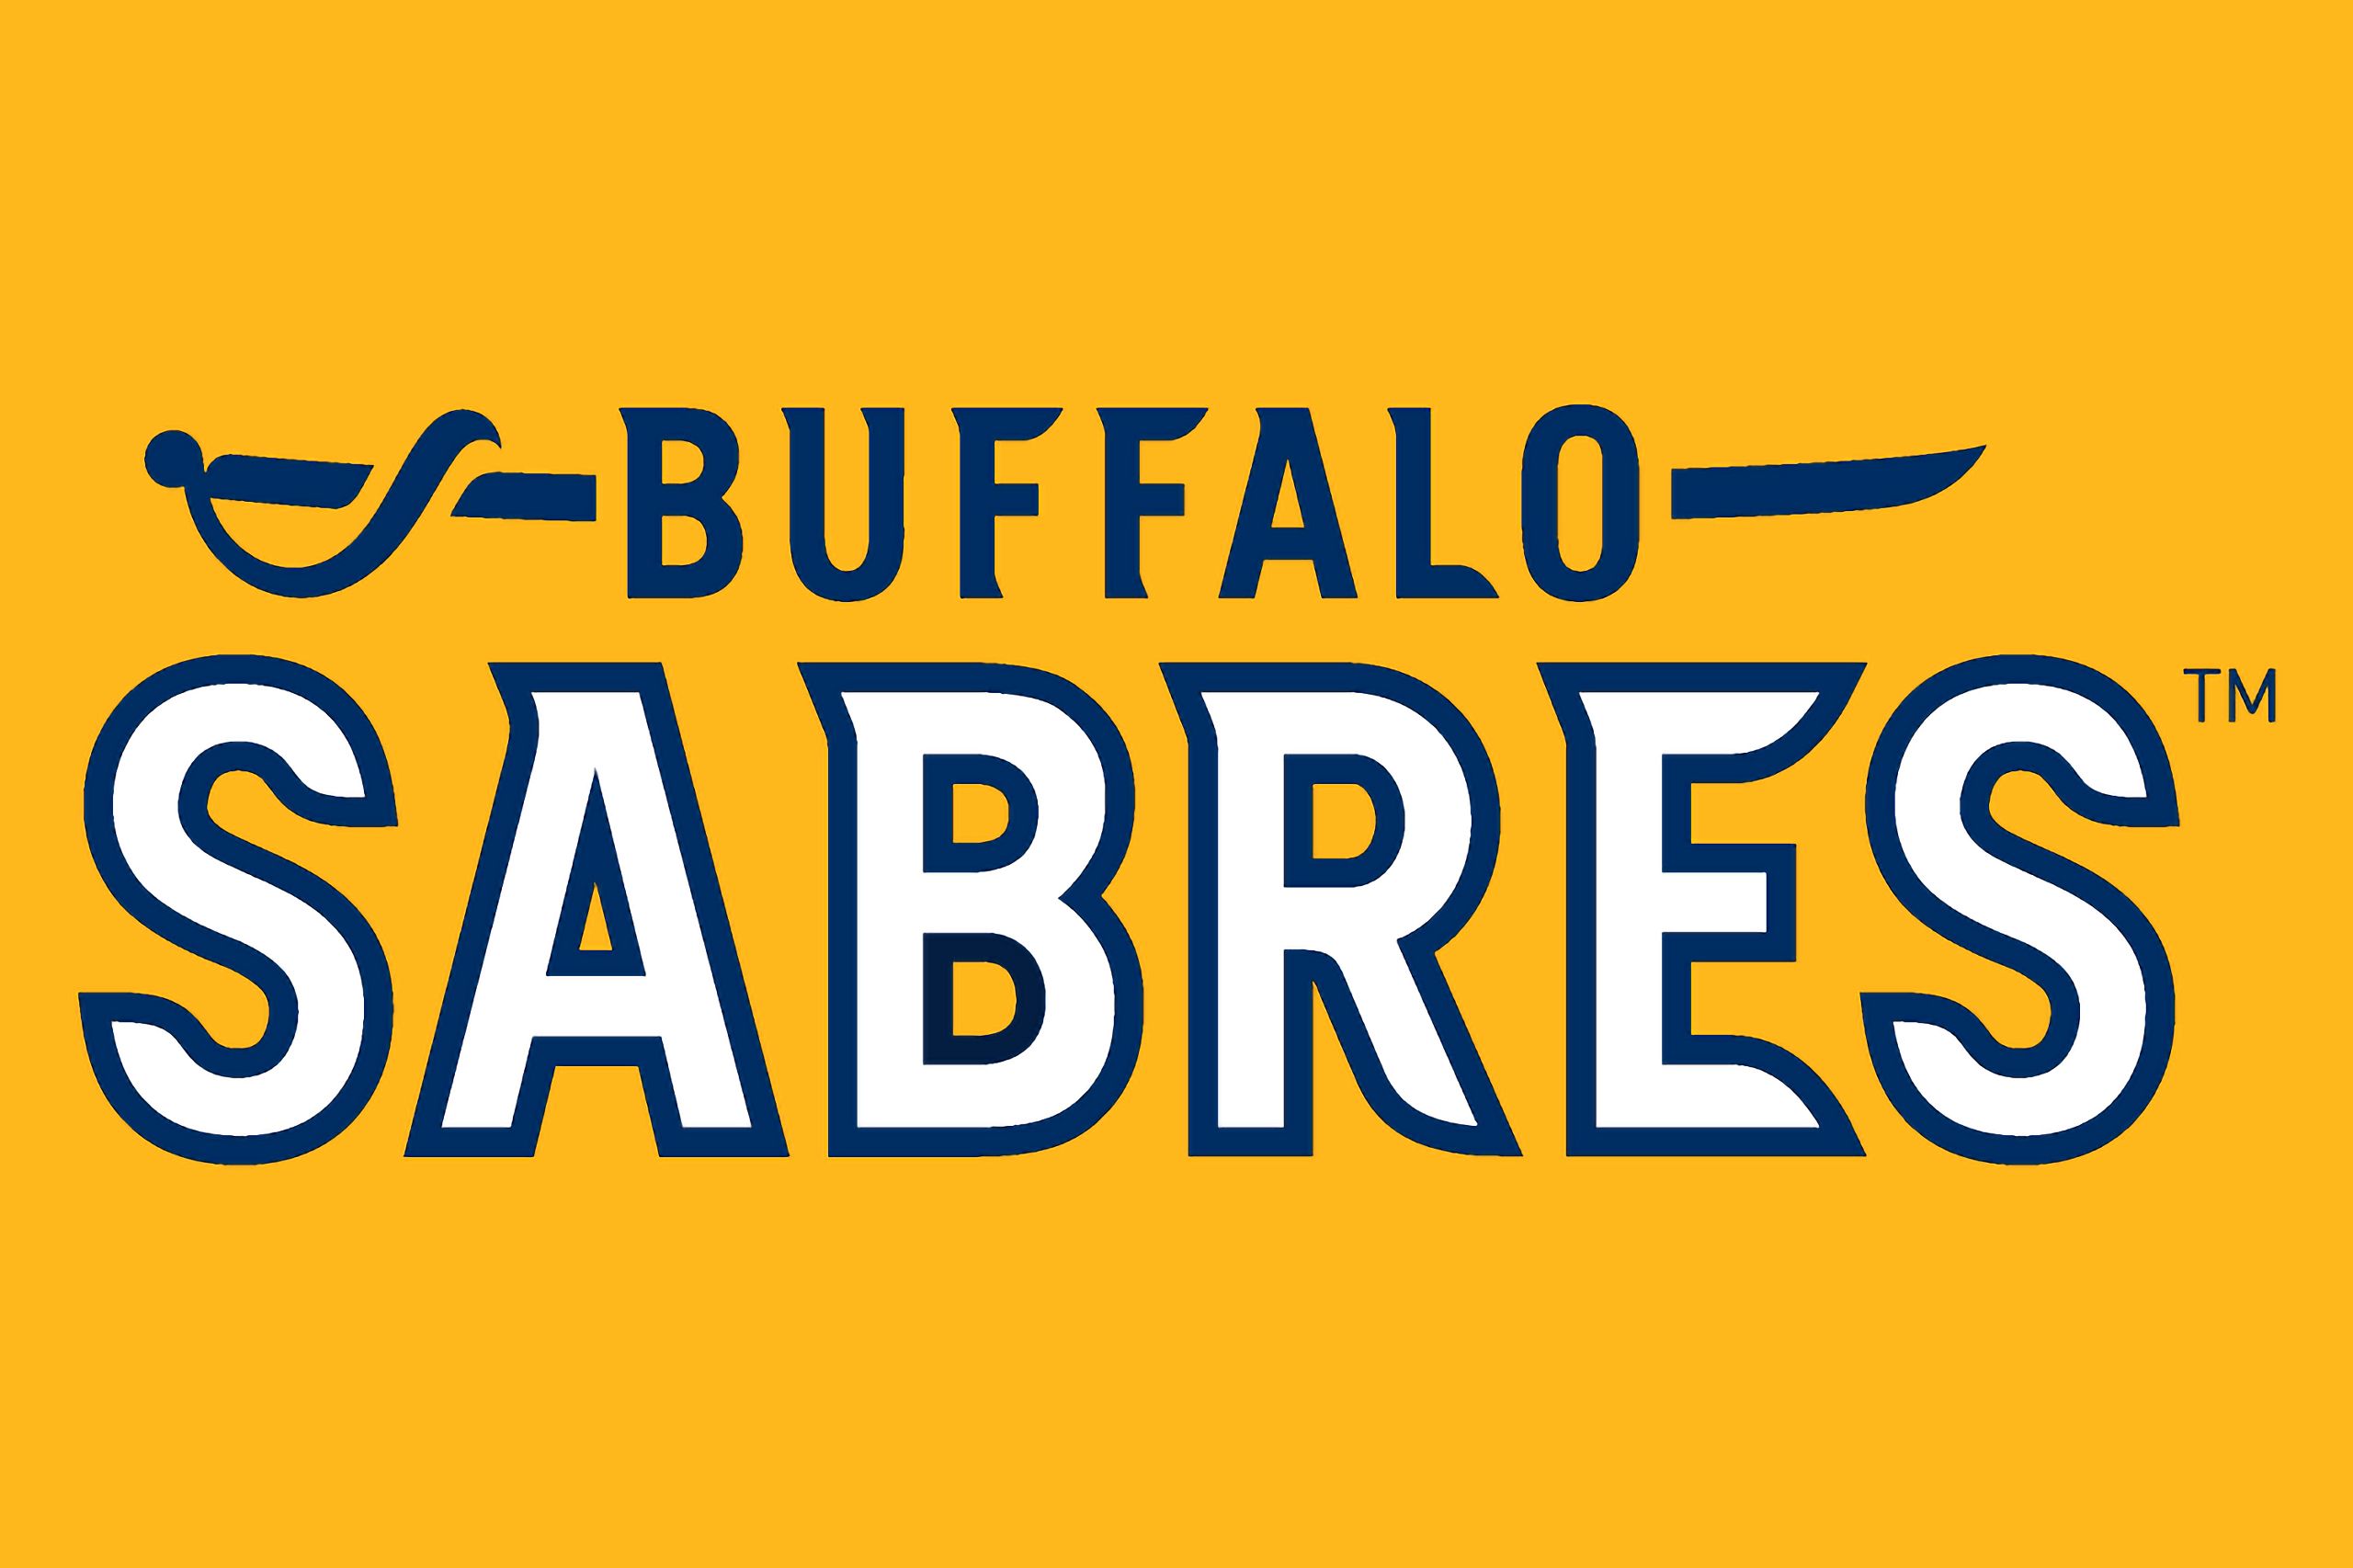 Buffalo Sabres on X: #Sabres50 wallpapers are hot and ready